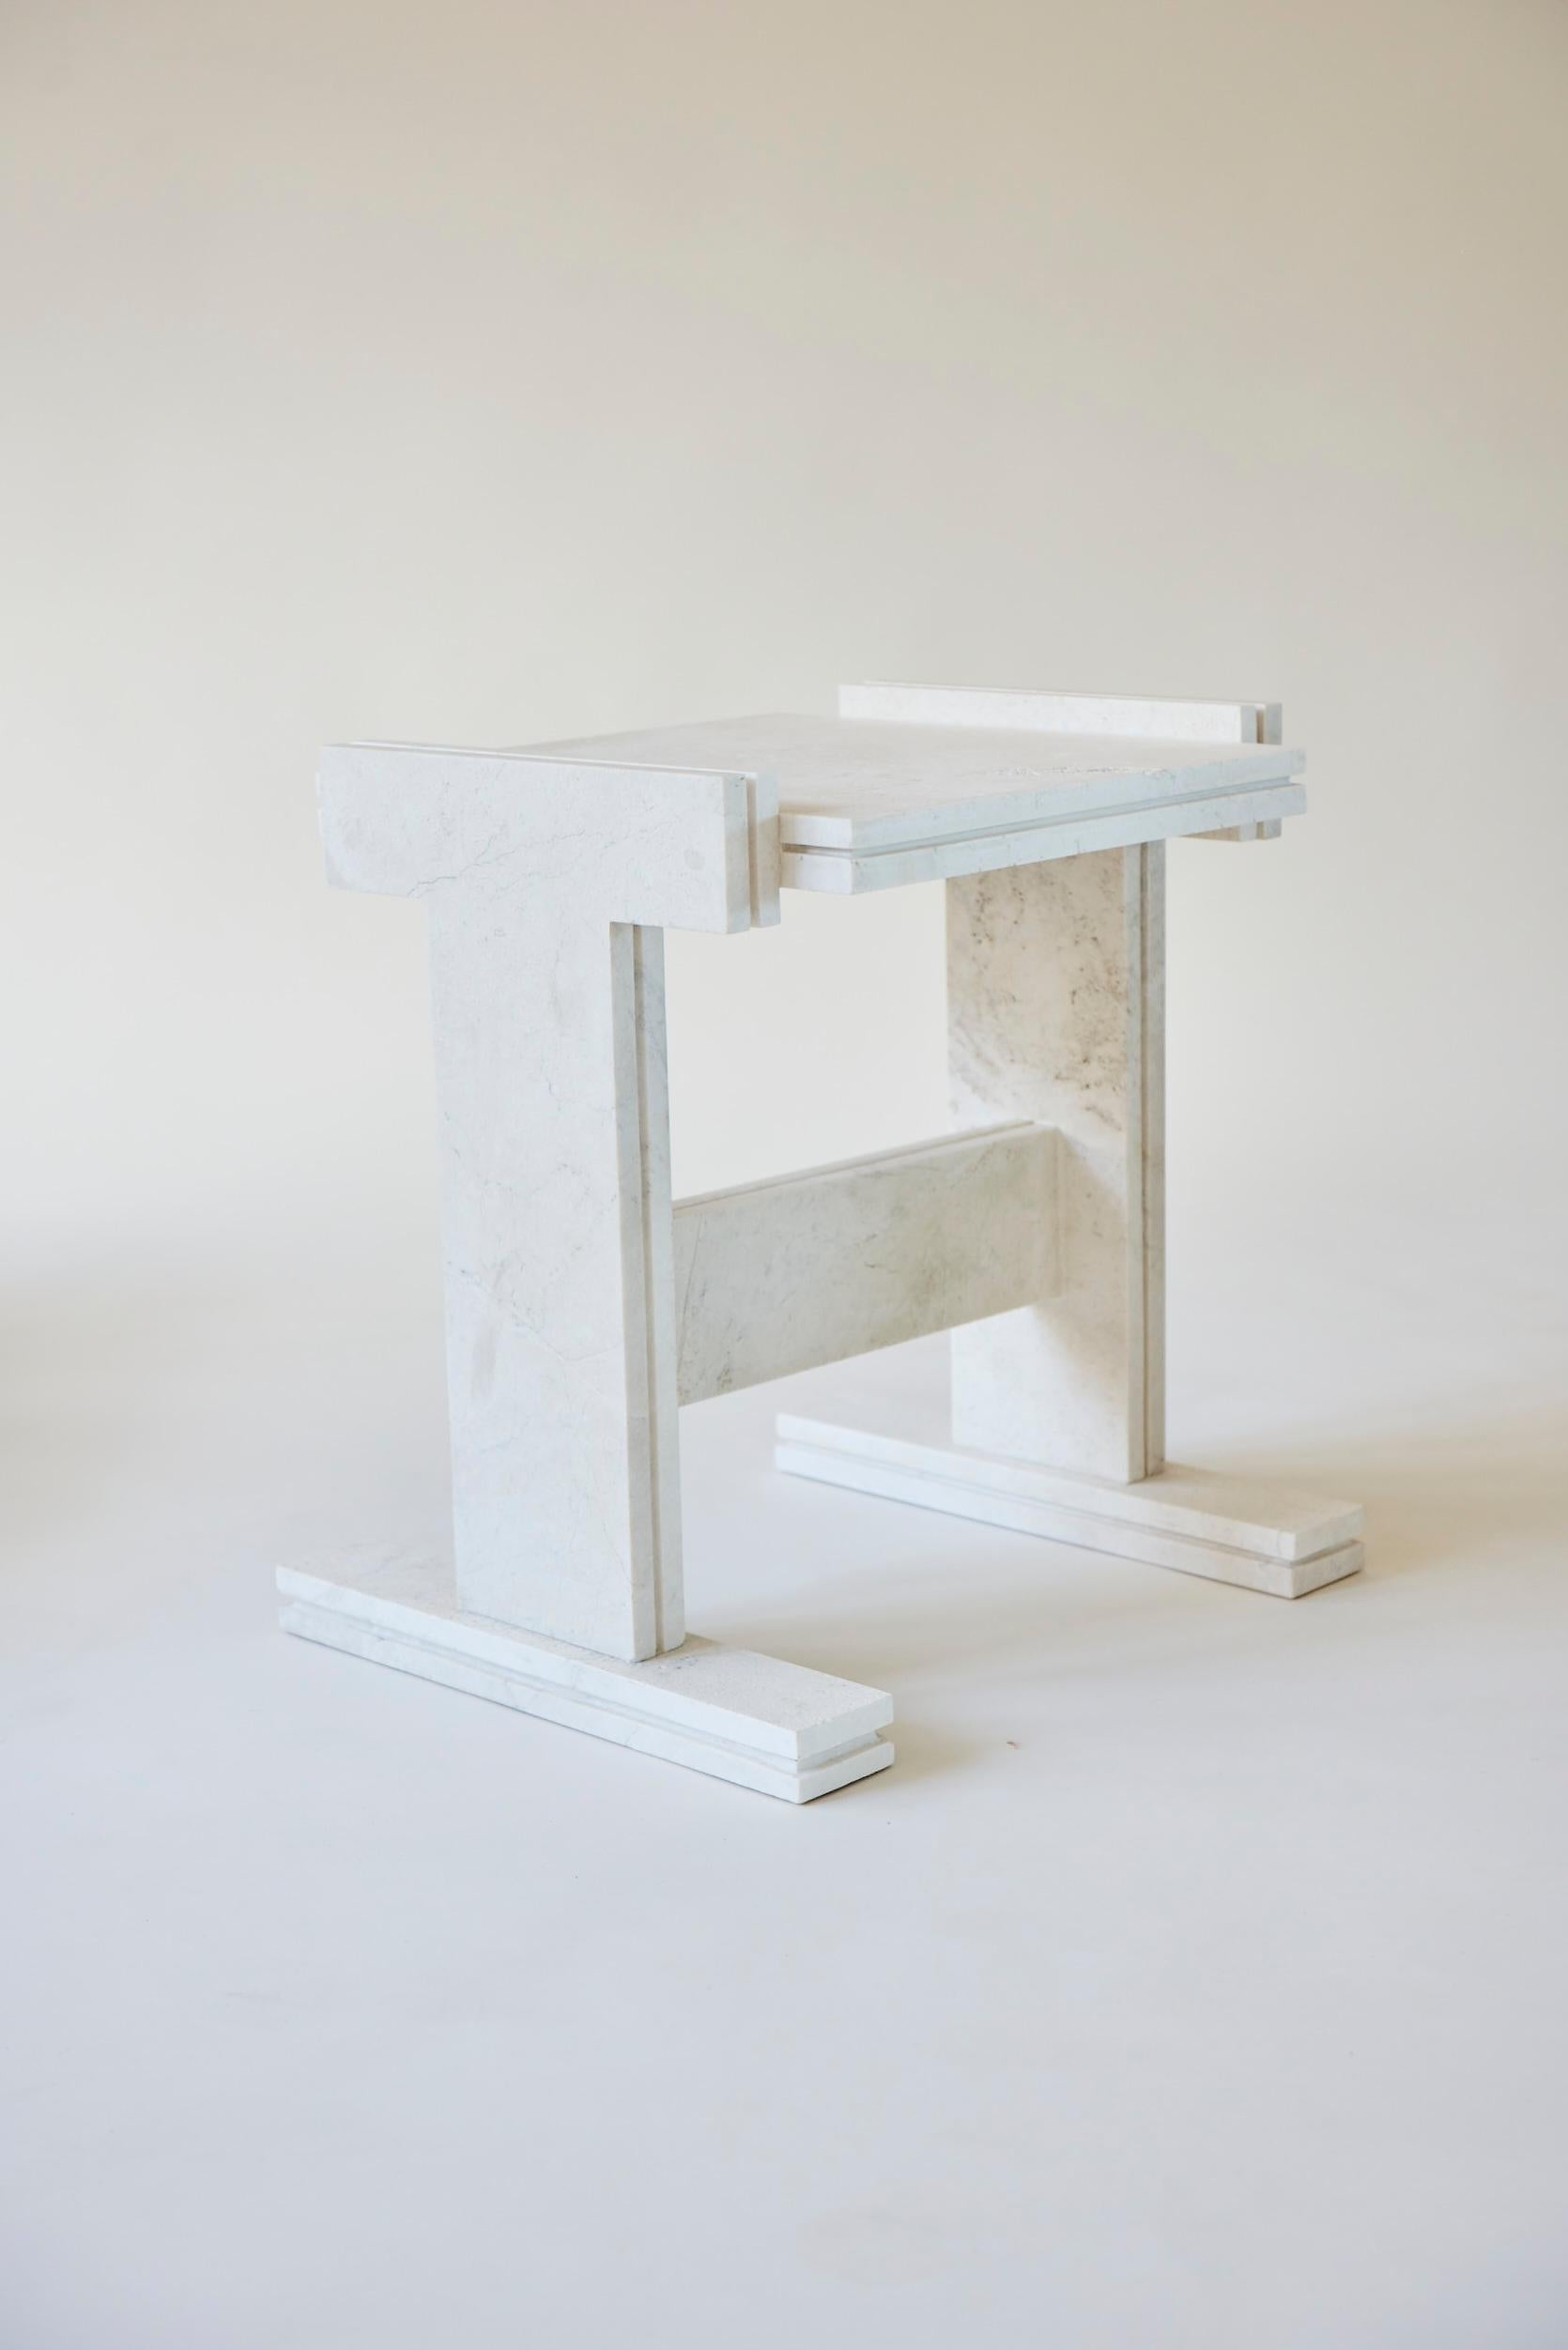 White Pearl Premium Neave Side Table by Nish Studio
Dimensions: W 41.7 x D49.2 x H 51.7 cm.
Materials: White Pearl premium marble with a u-groove detail and acid washed + brushed finish

N I S H is a Cape Town based Fashion and Furniture design